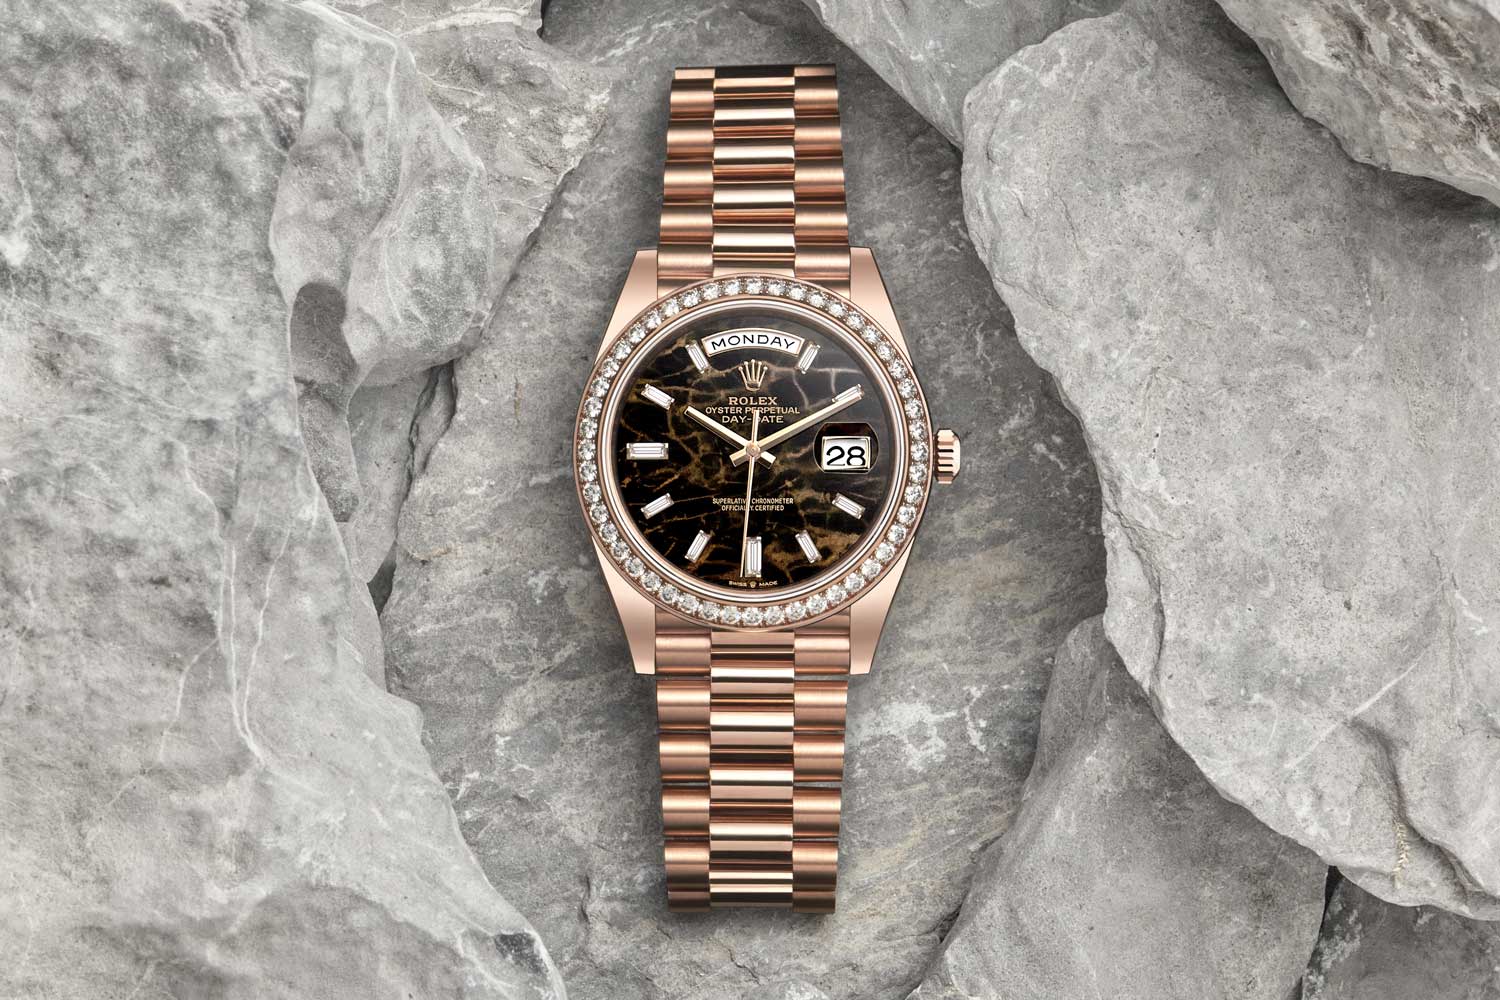 One of Rolex's several under-radar launches at Watches & Wonders 2021 was a new Date-Date with an eisenkiesel stone dial in both the 36mm and 40mm sizes